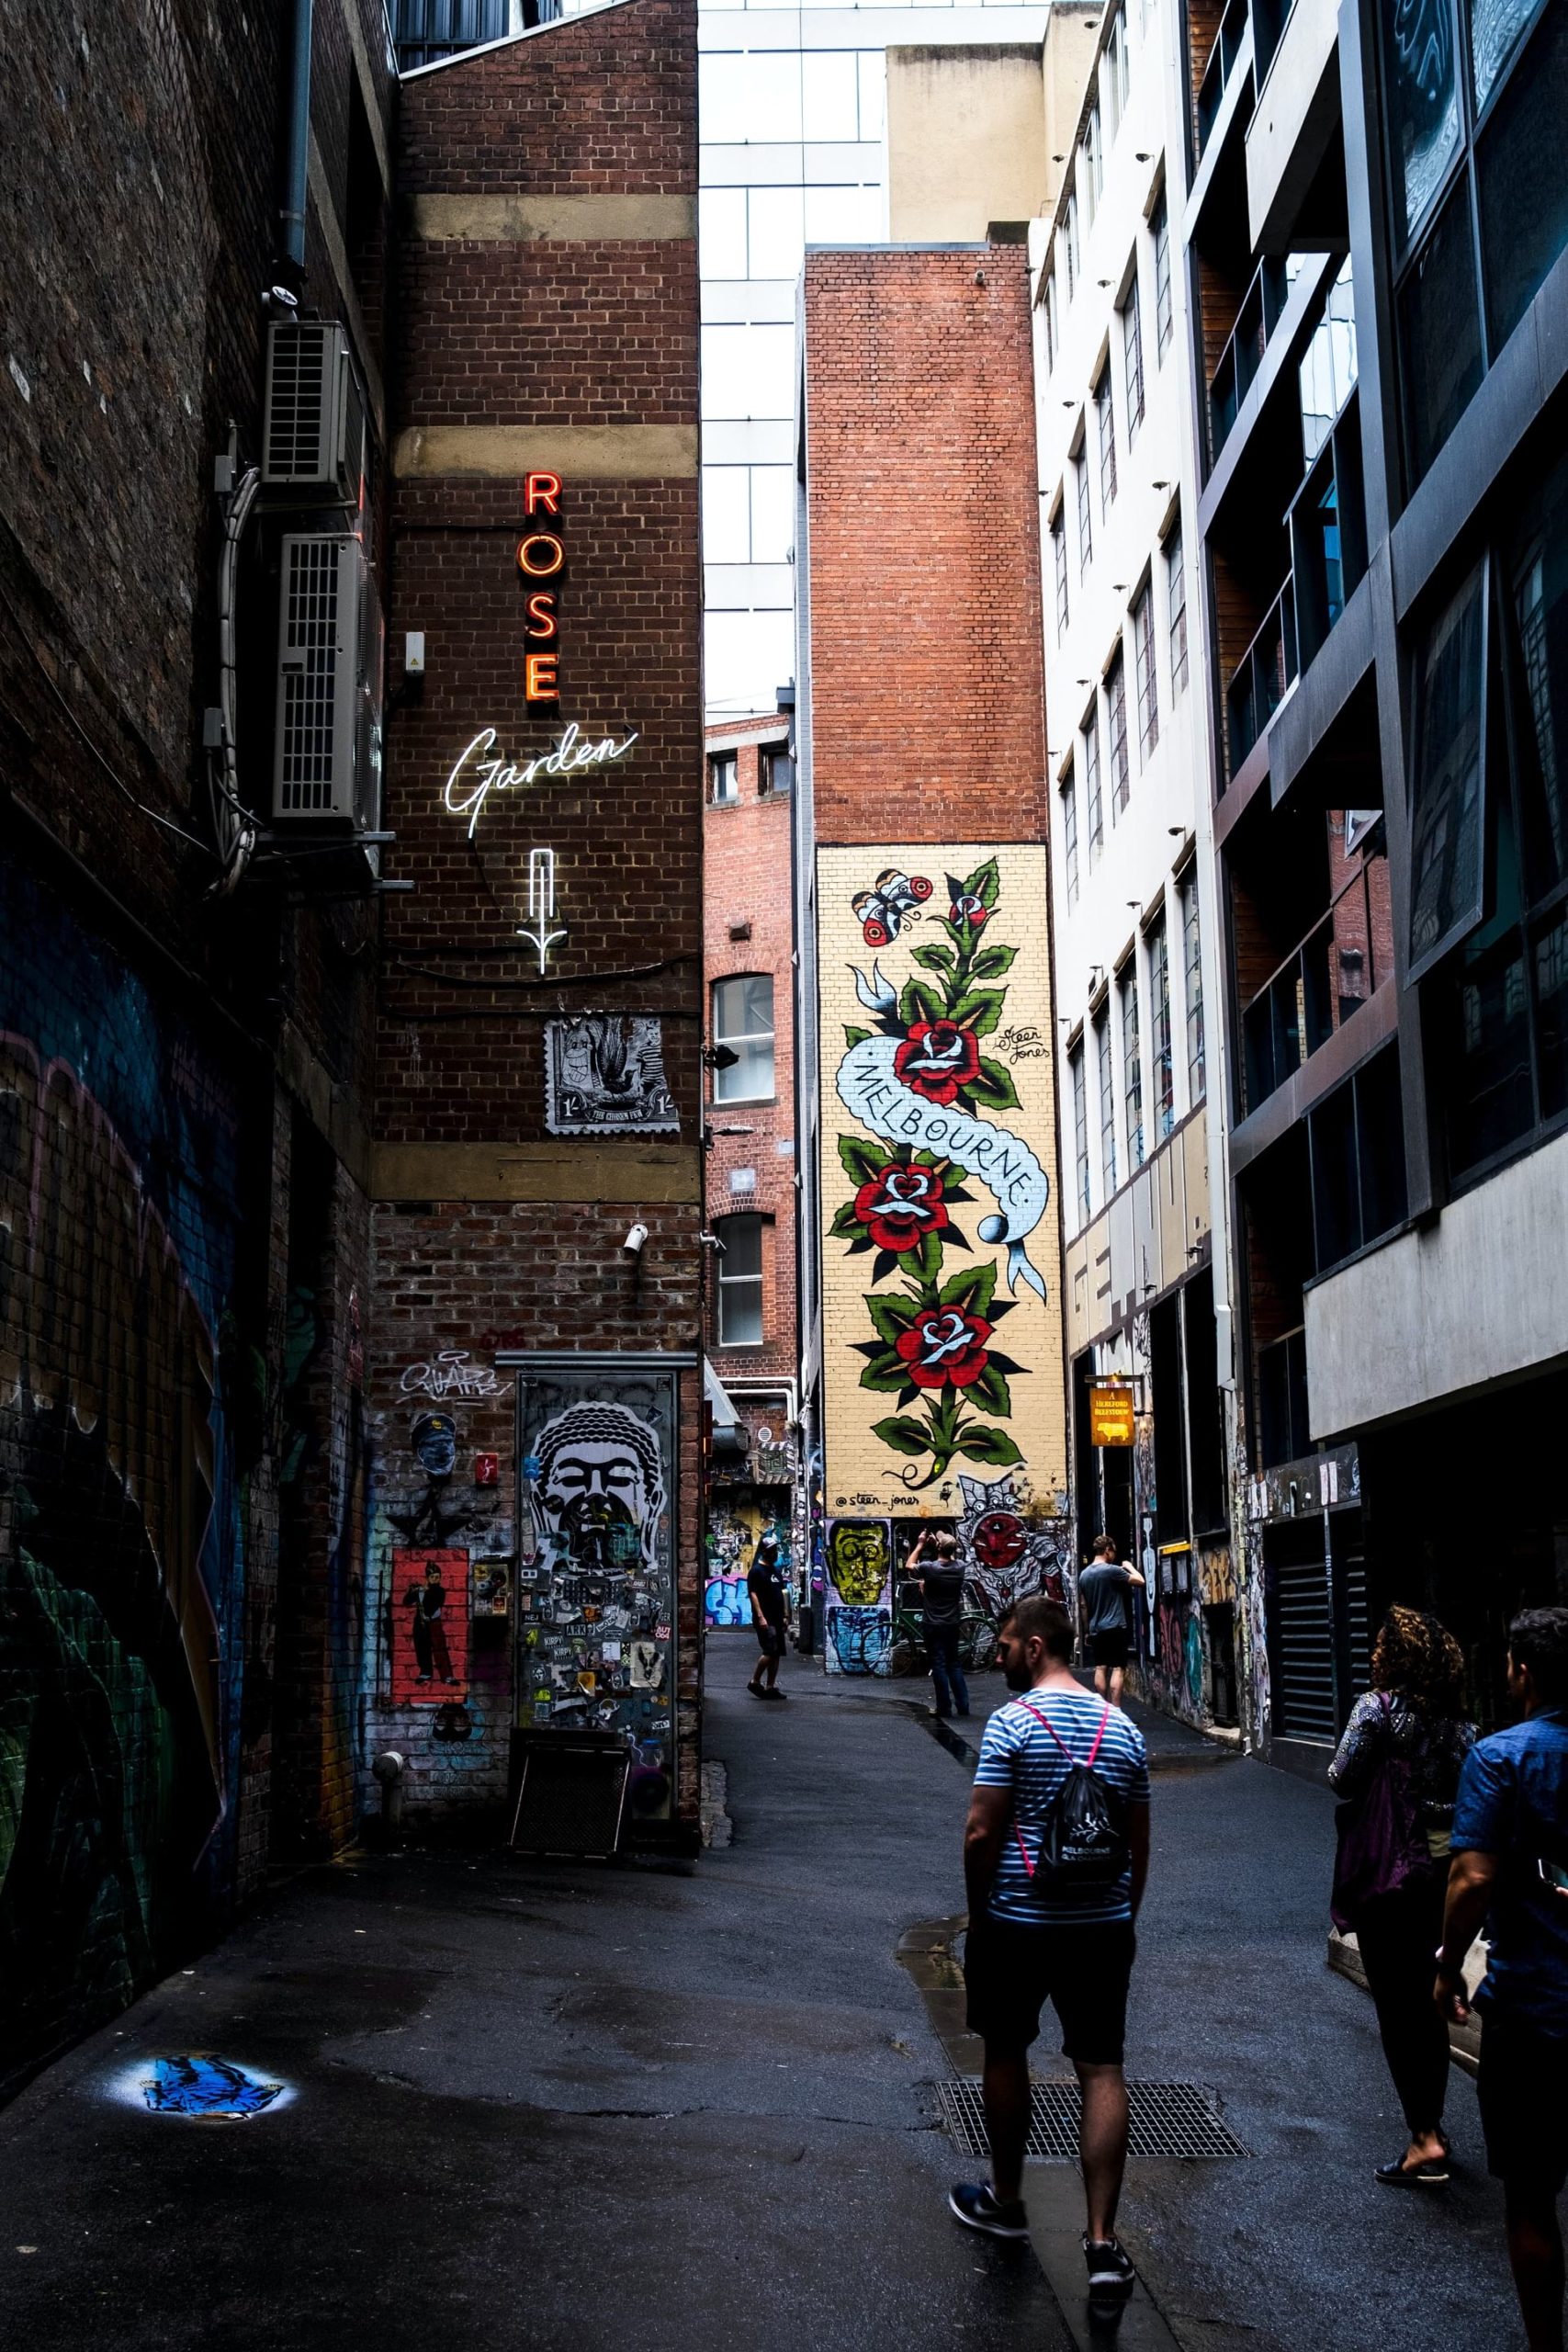 Famous laneway in Melbourne filled with Australians enjoying recreational activities